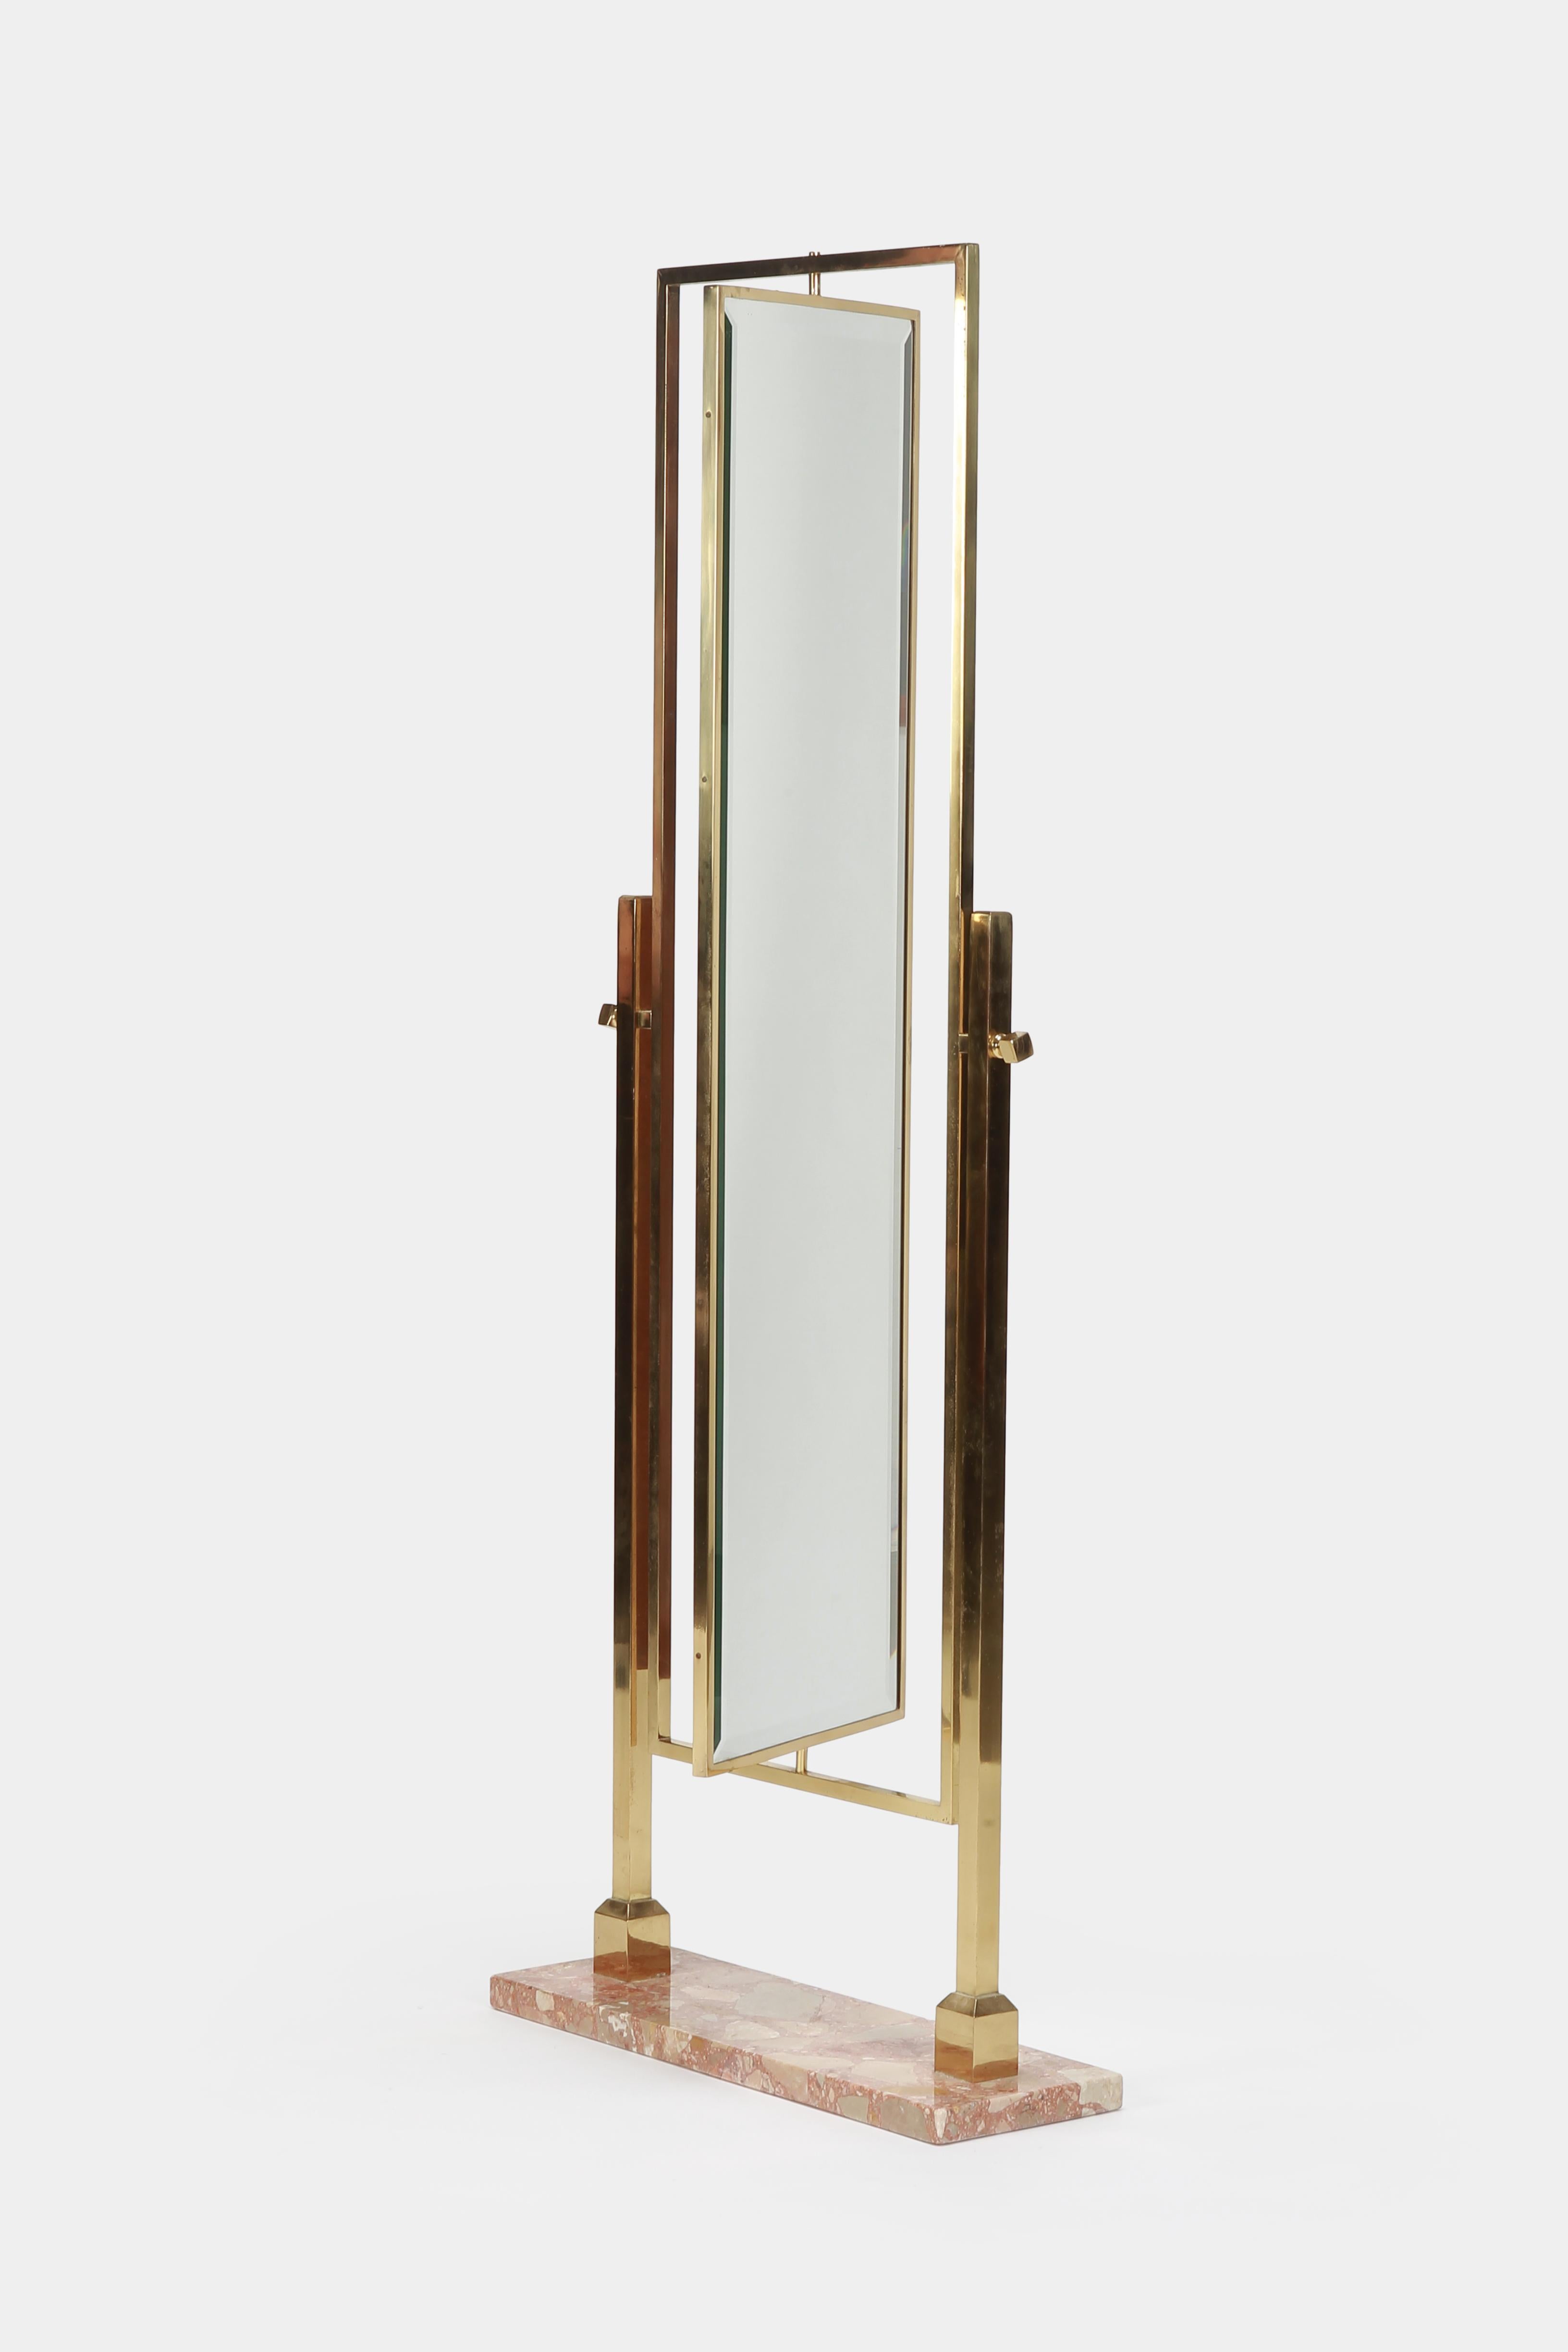 Italian full body mirror from the 1970s made in Italy, with marble base and brass frame. On the one hand rotatable to the side, but also an adjustable standing angle. Very complex object.